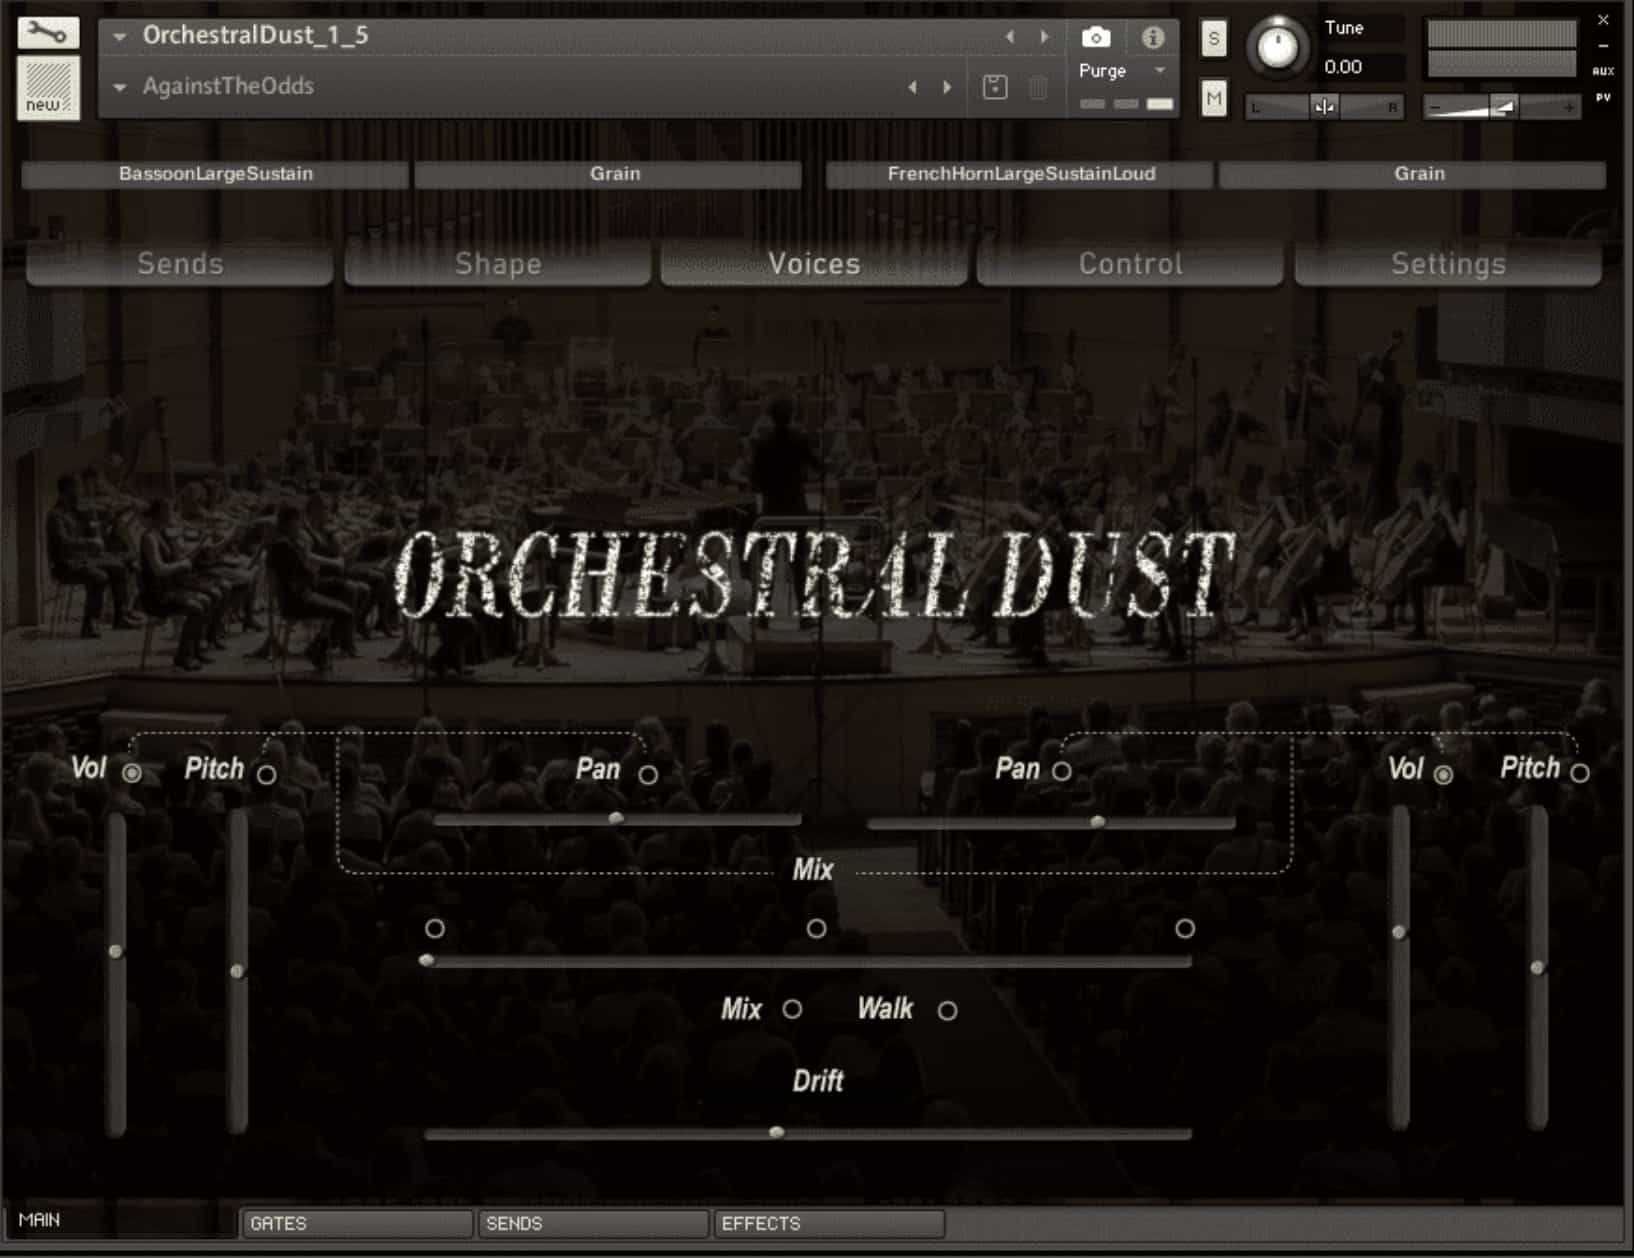 Orchestral Dust 1.5